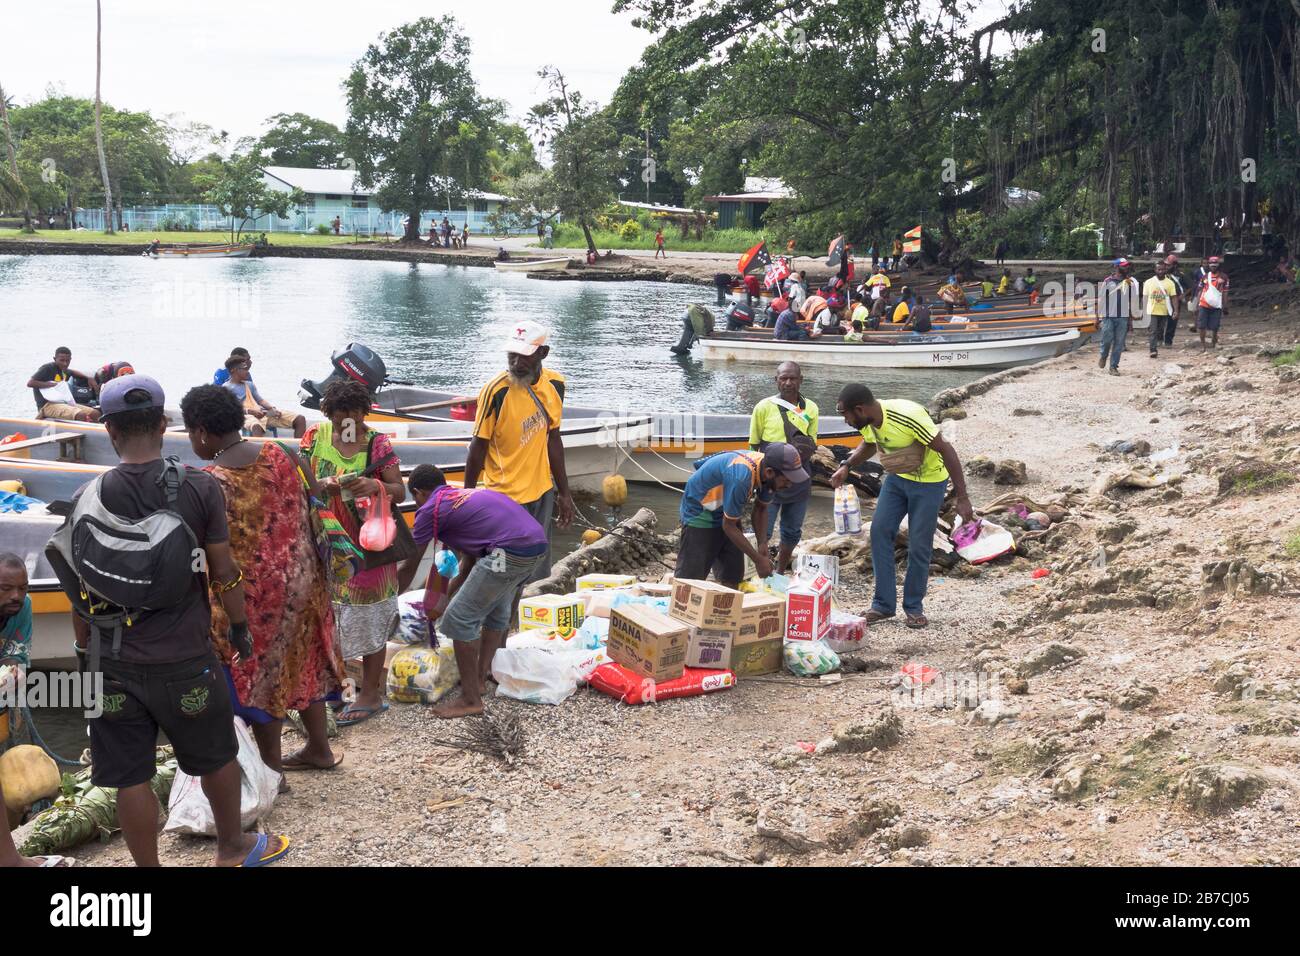 dh Boat ferries landing MADANG PAPUA NEW GUINEA Local people discharging ferry boats harbour Stock Photo